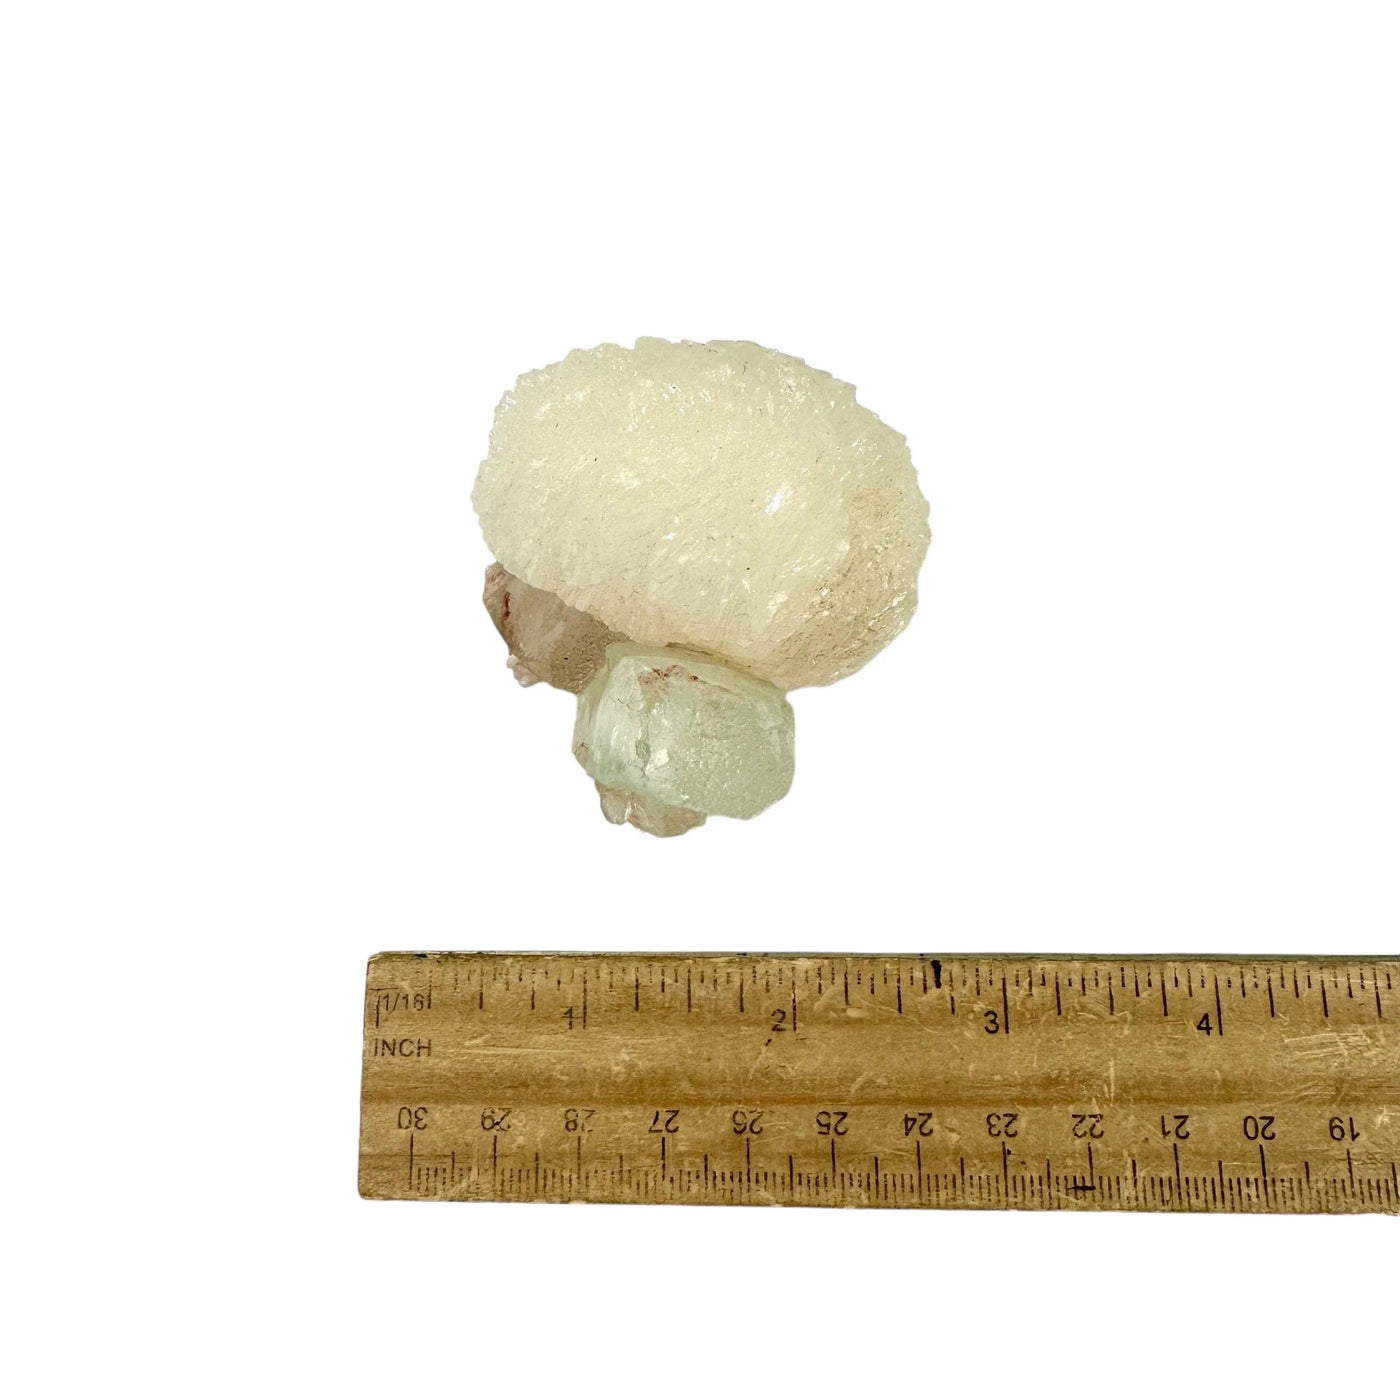 Stilbite Crystal with Green Apophyllite and Zeolite with ruler for size reference